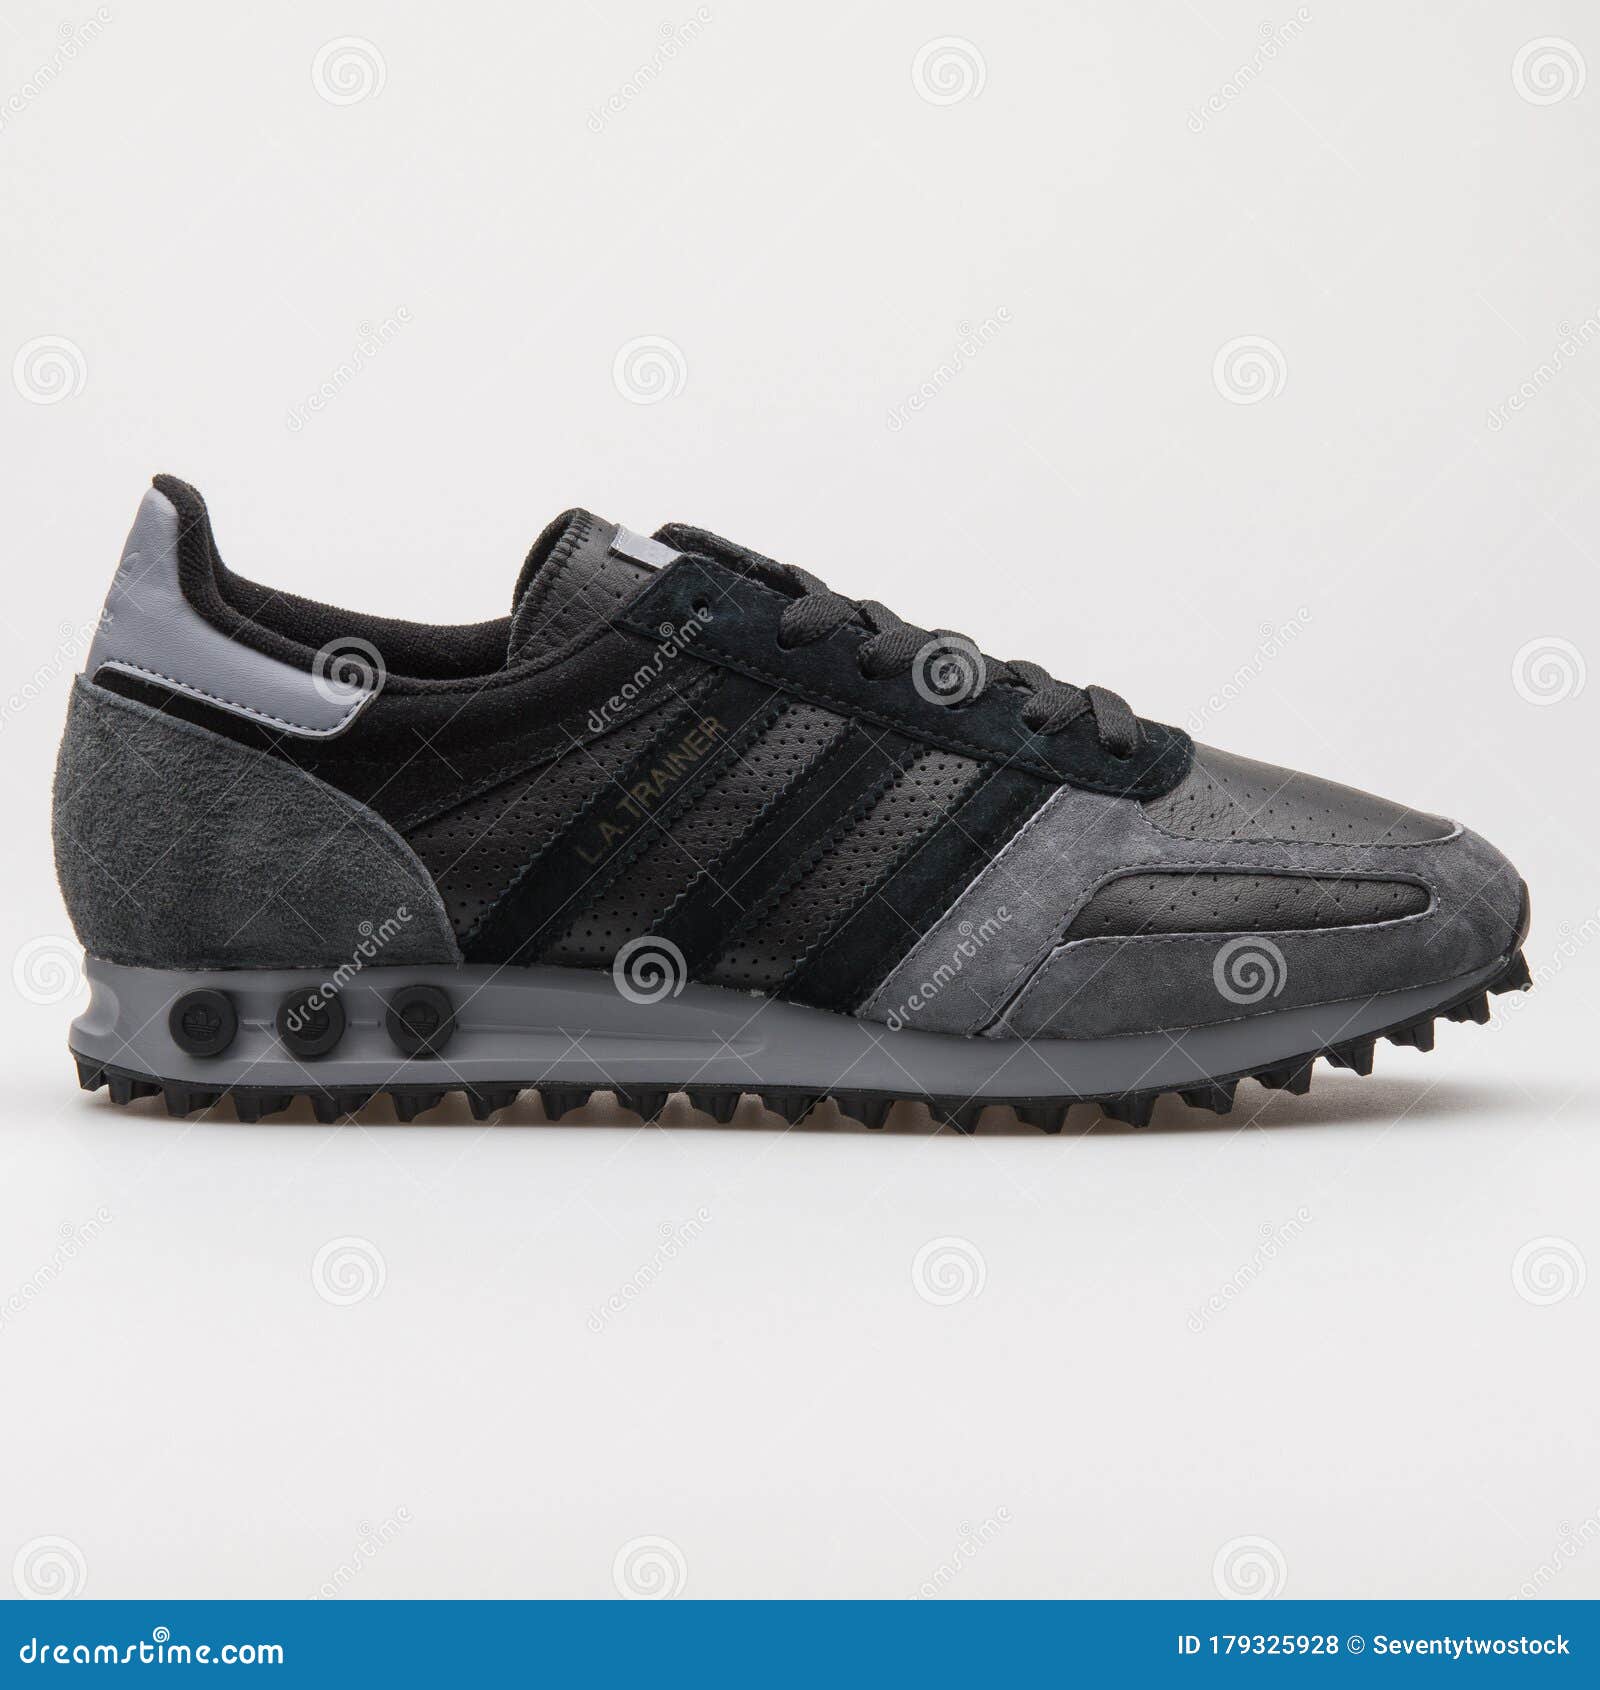 Adidas Trainer Grey and Black Sneaker Editorial Stock Photo - Image of adidas, laces: 179325928